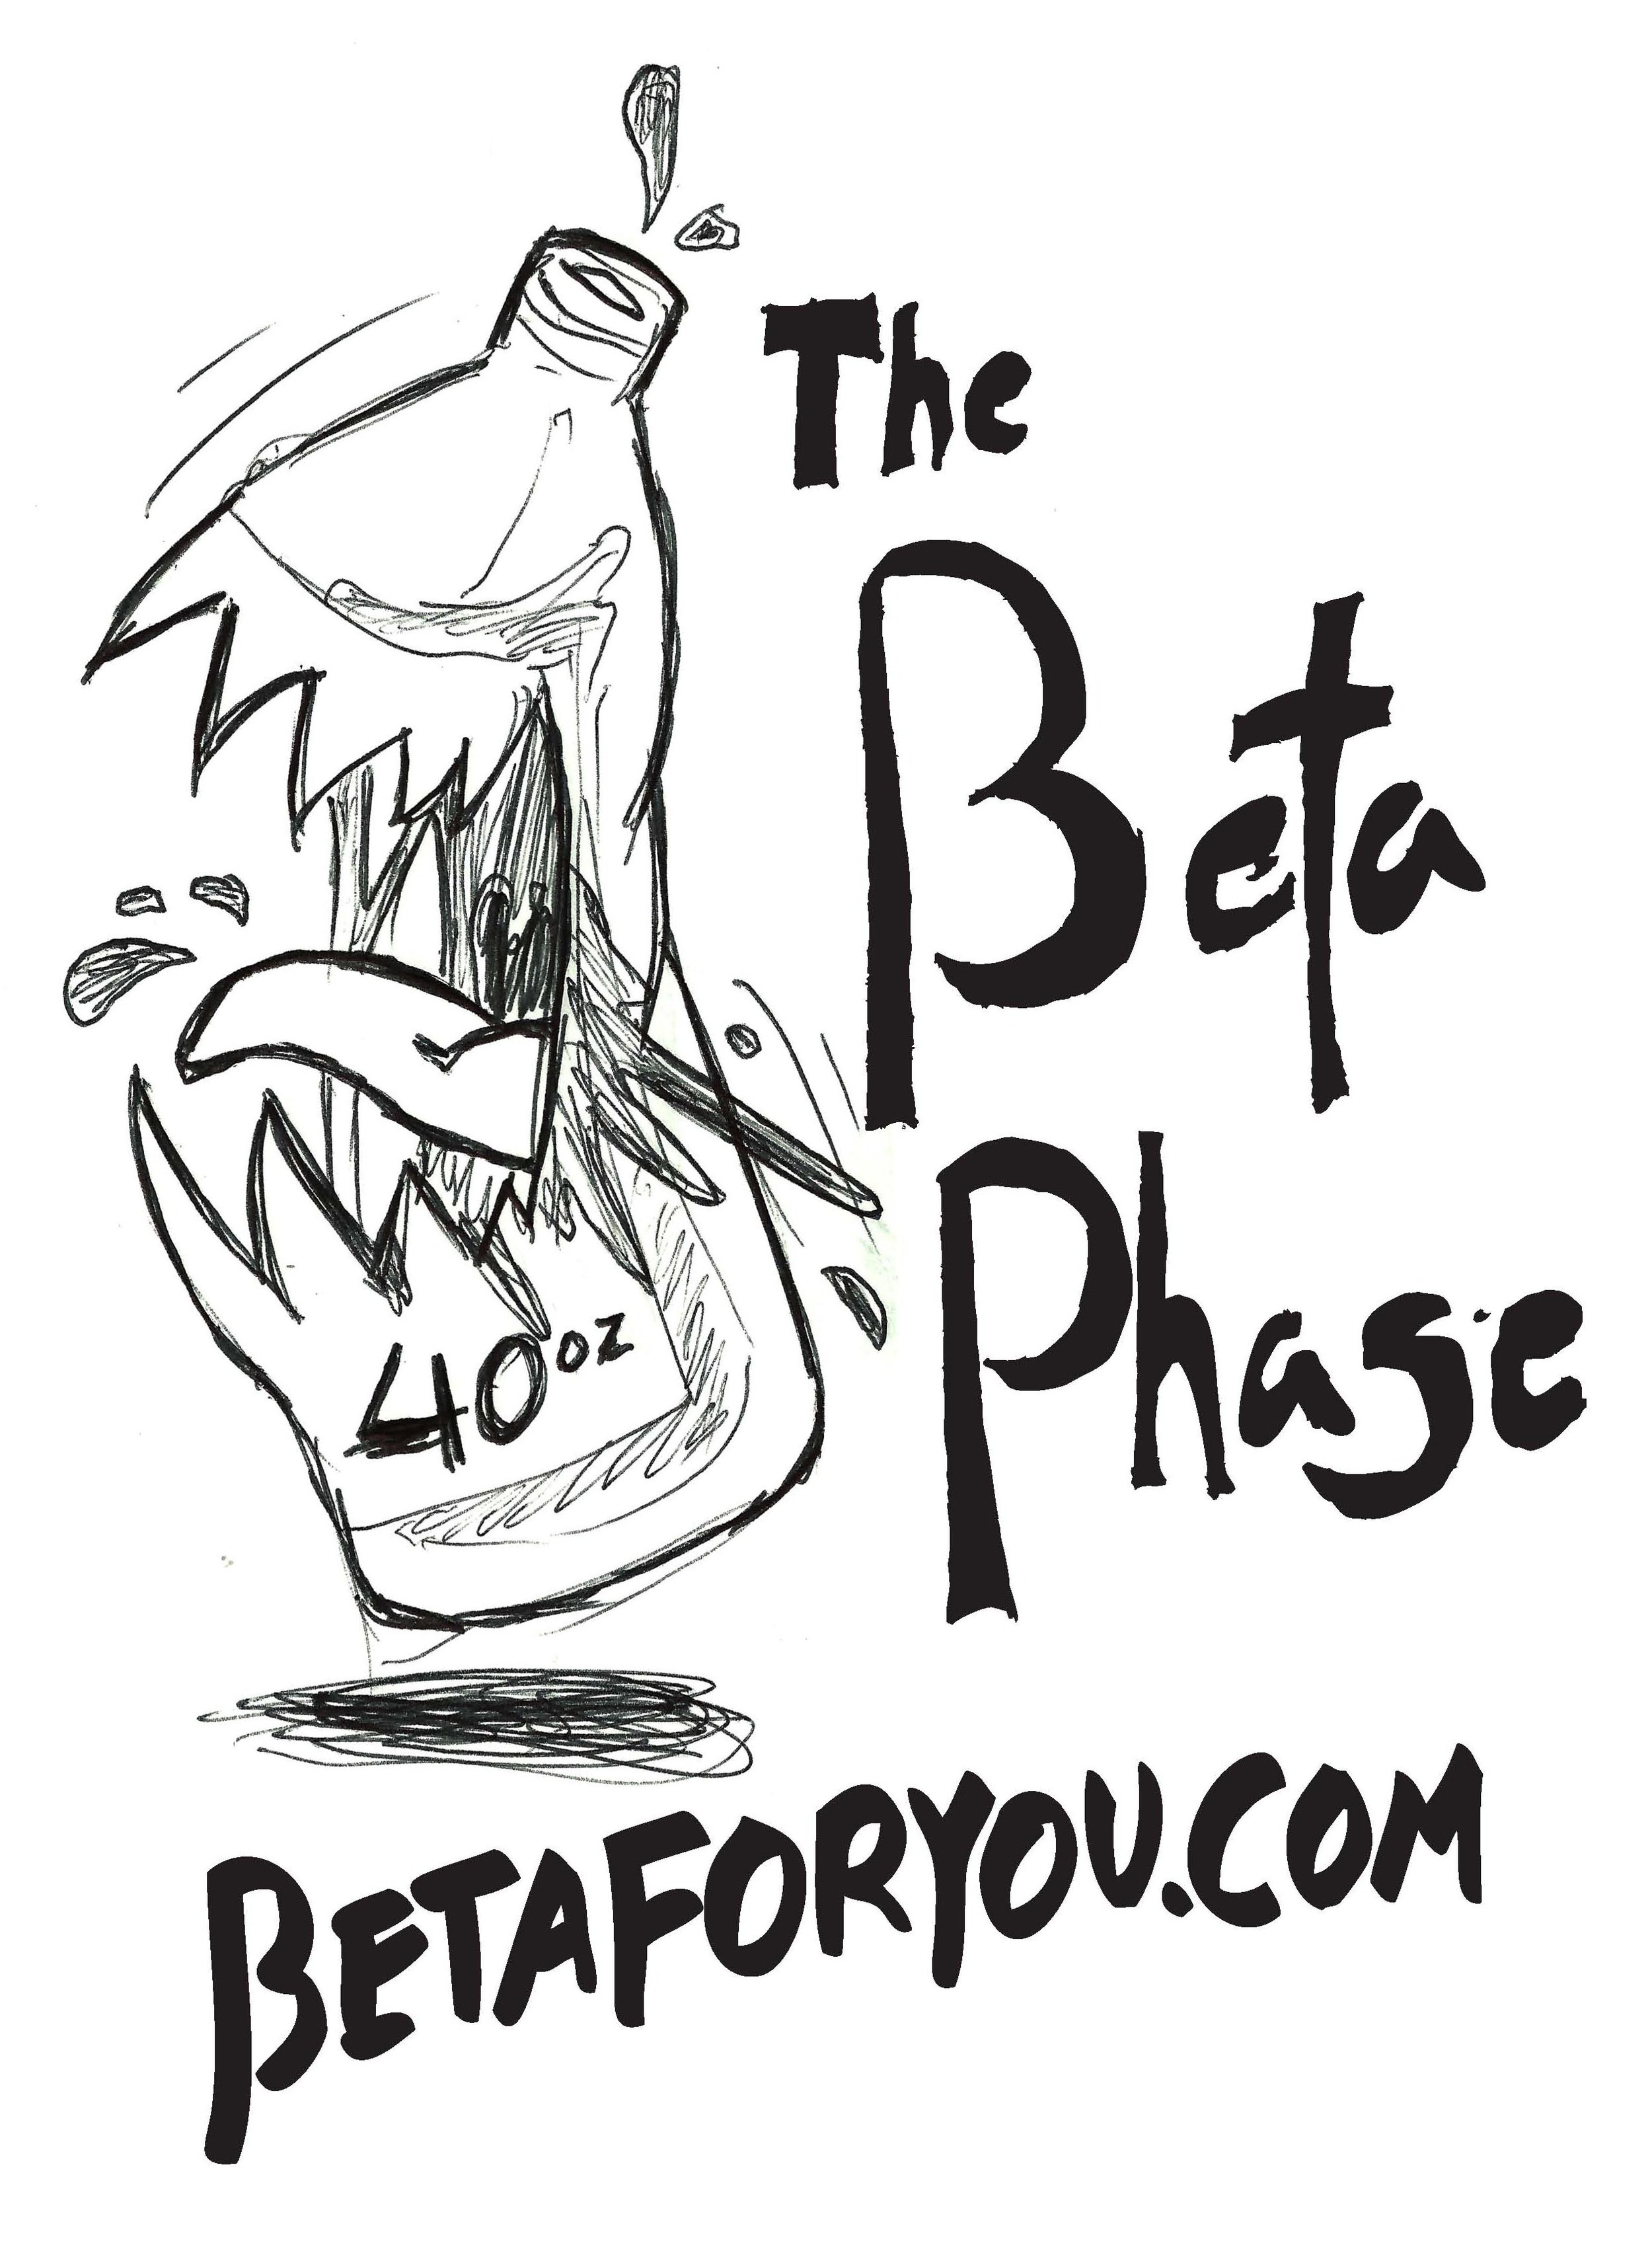 Sticker for The Beta Phase